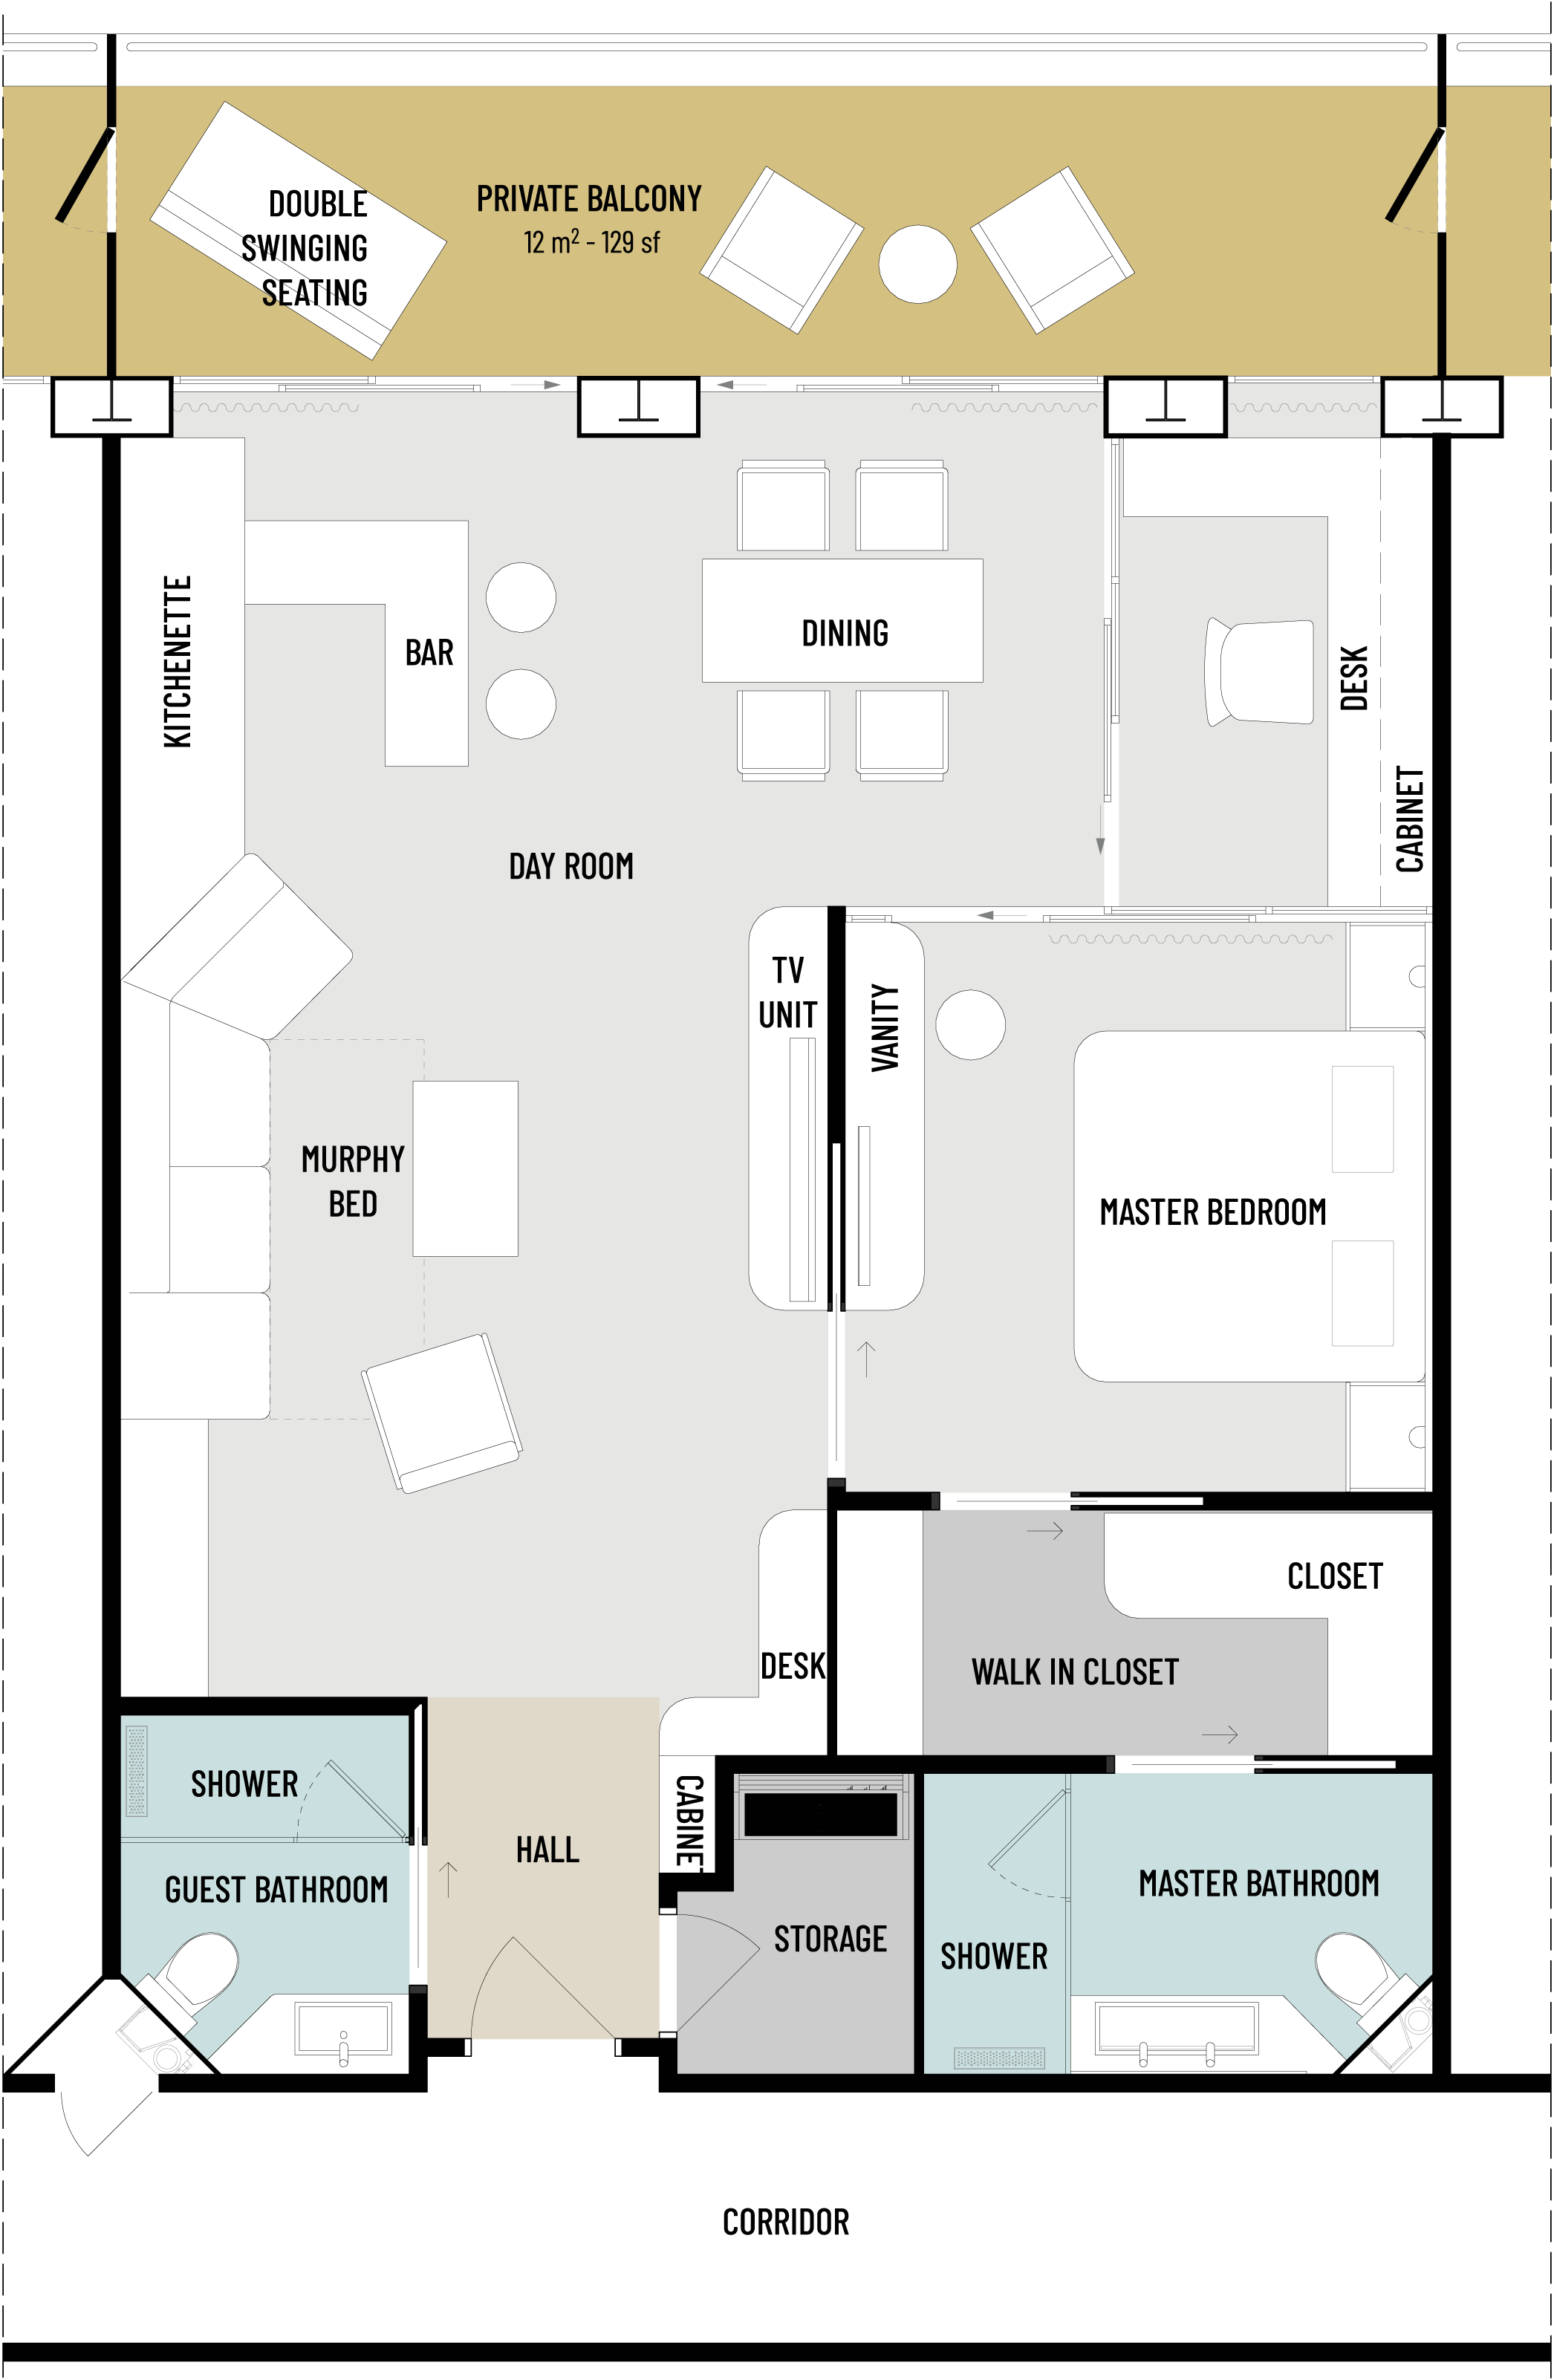 Floorplan of RU4 unit on cruise ship generous spaces for living, dining, bar area and home office.